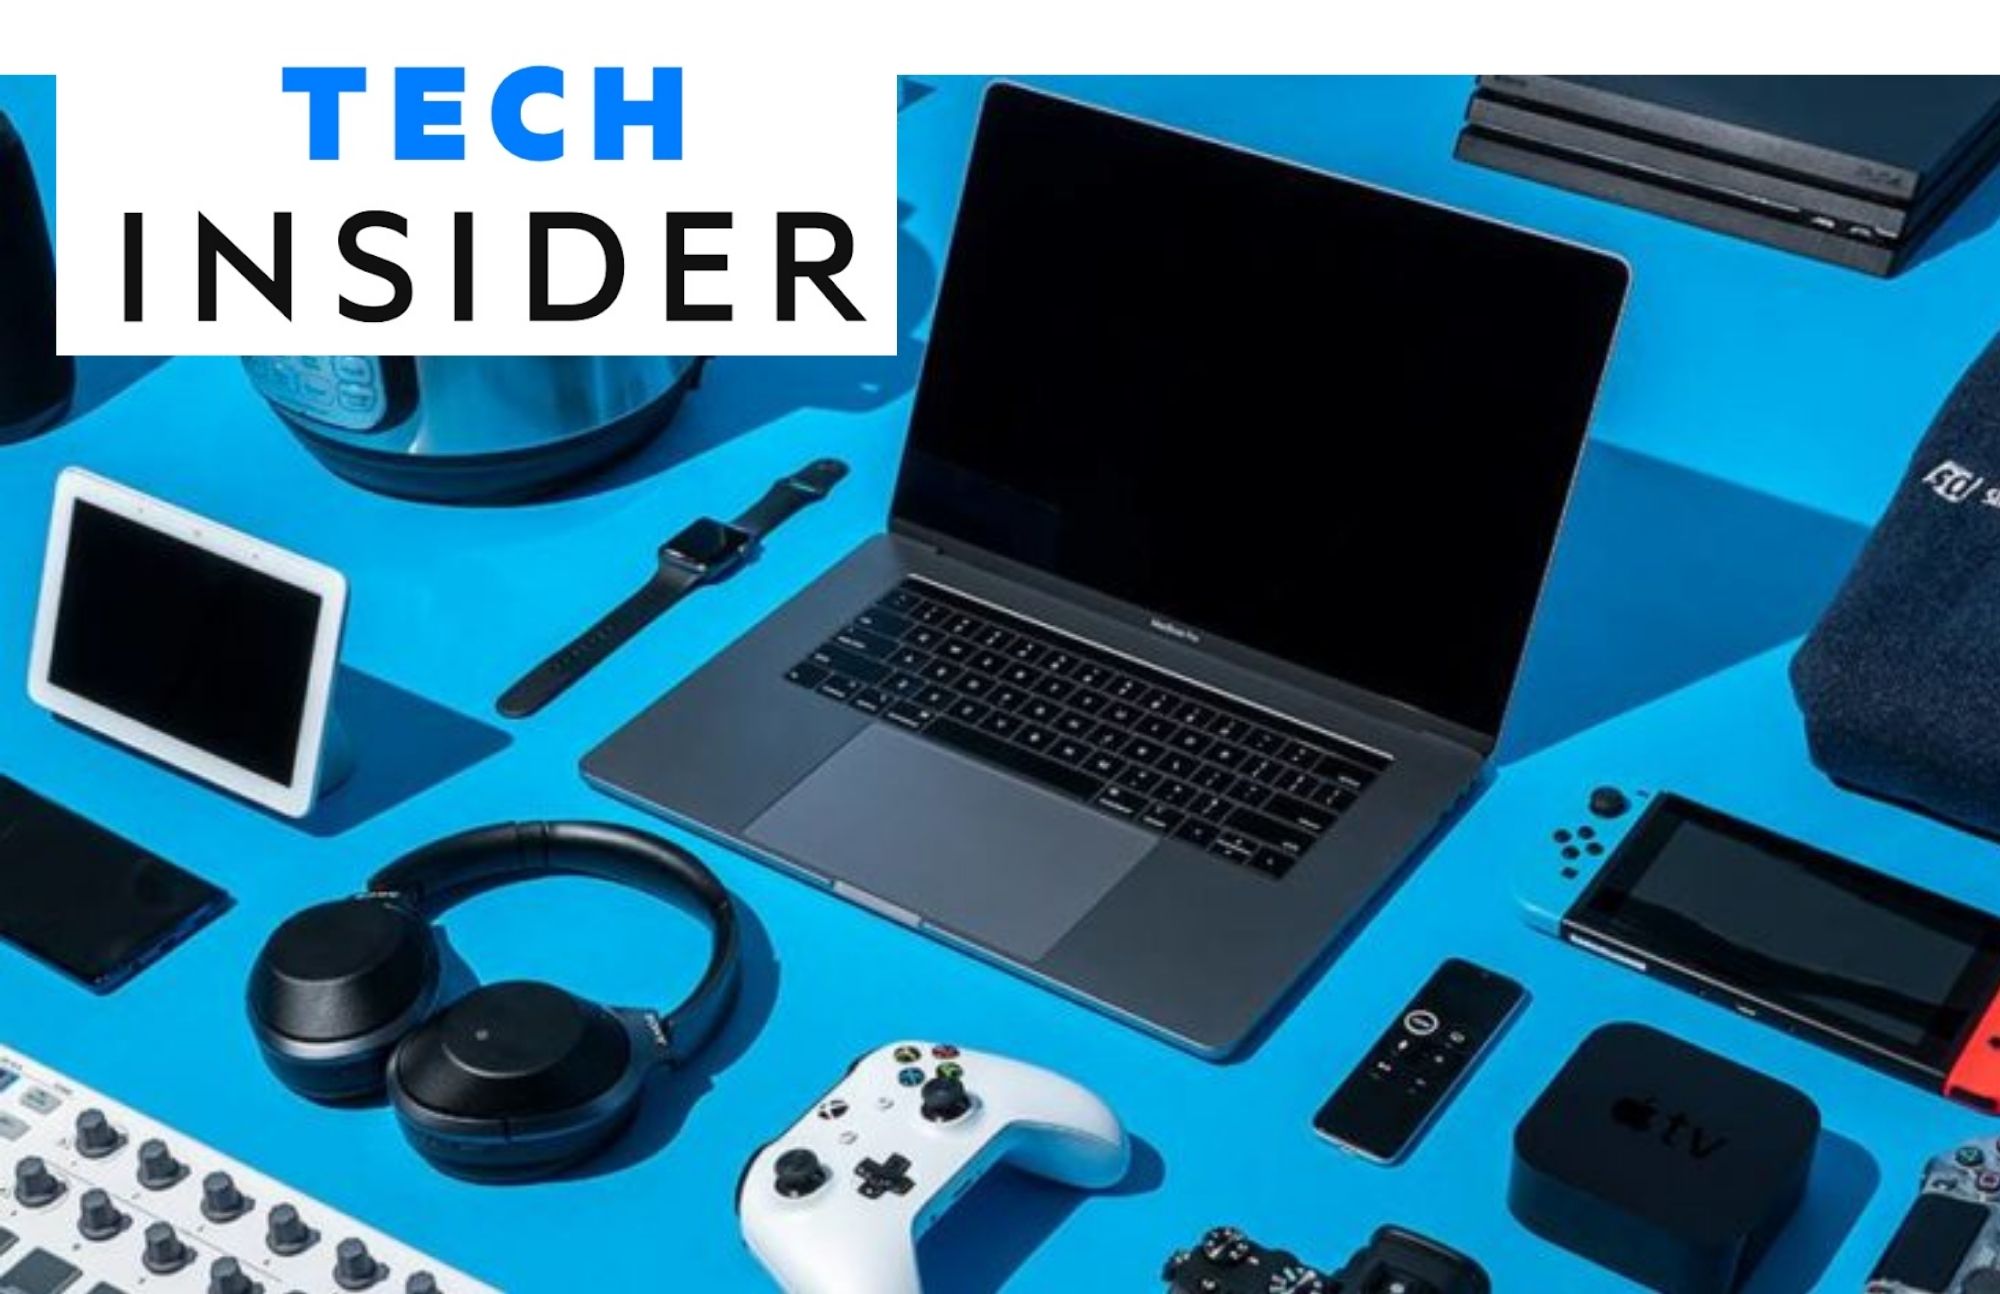 Tech Insider Latest Electronic Reviews - Your Reliable Source For Electronic Purchases